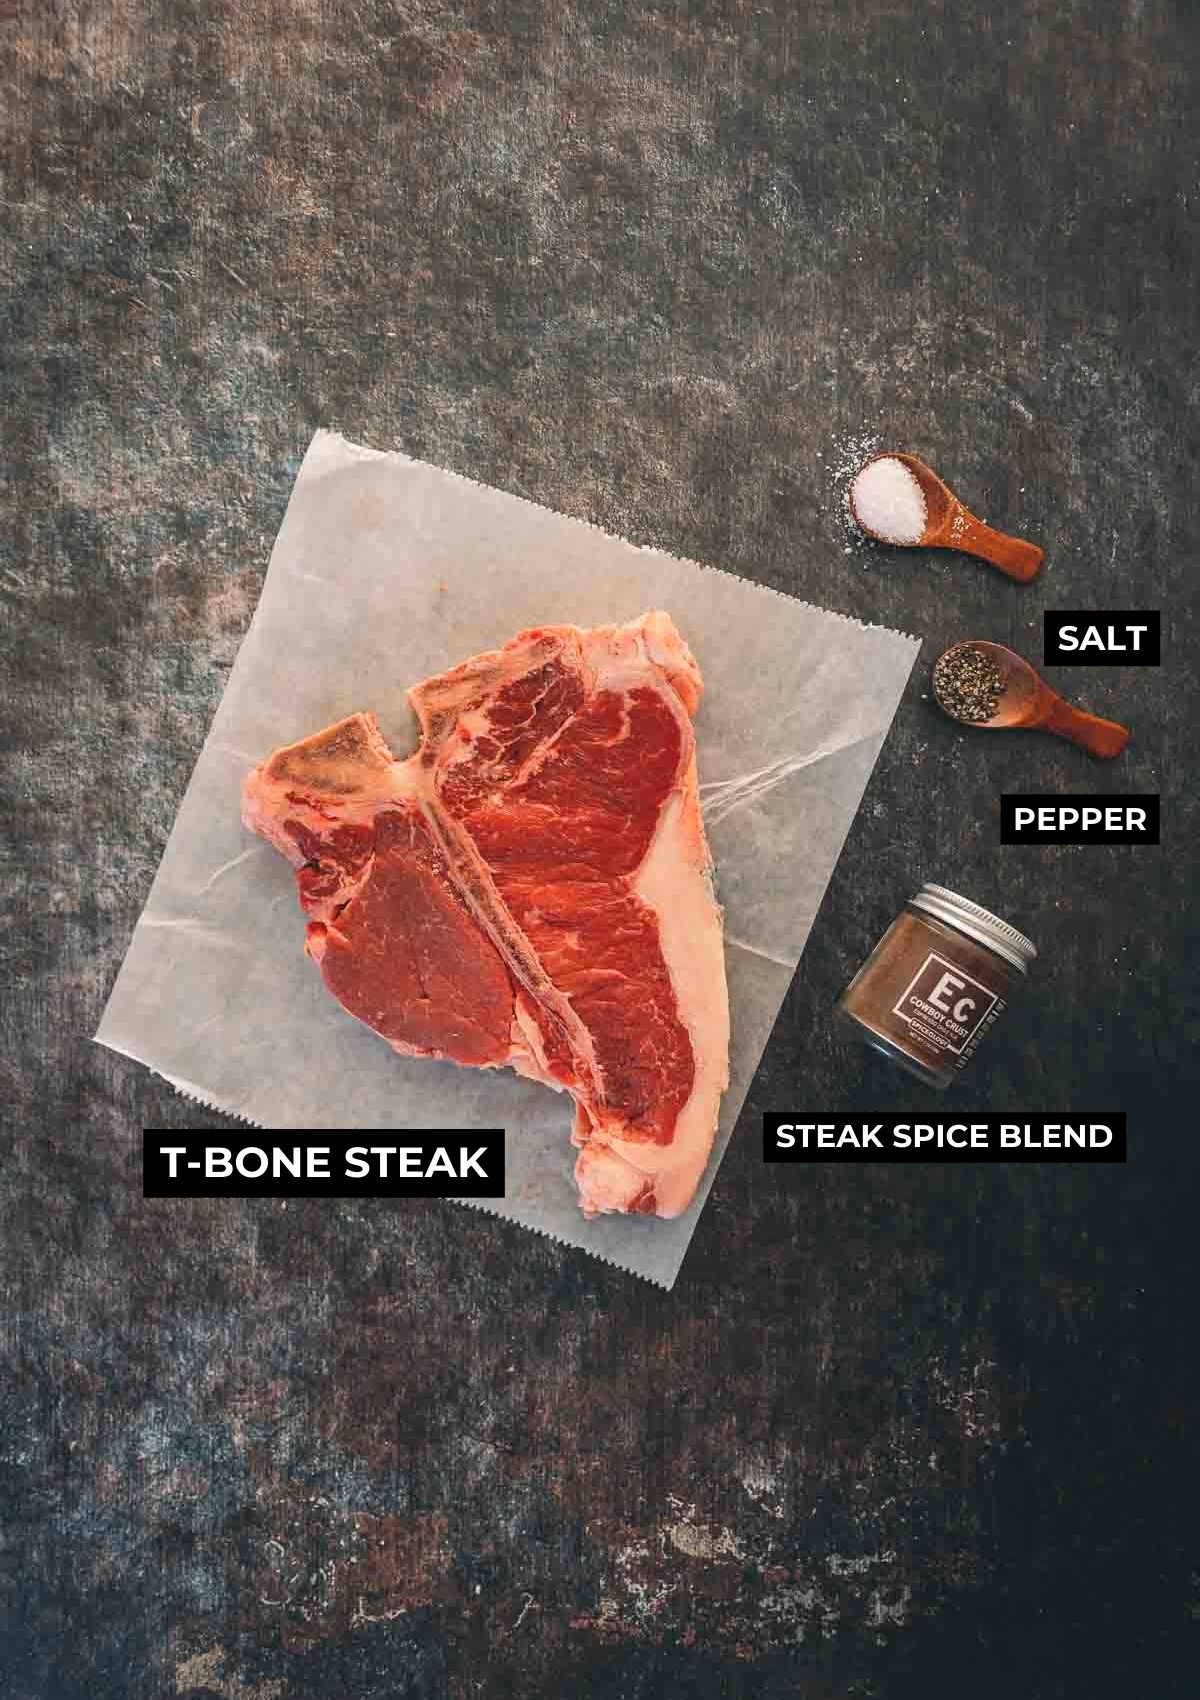 Ingredients for this grilled steak.